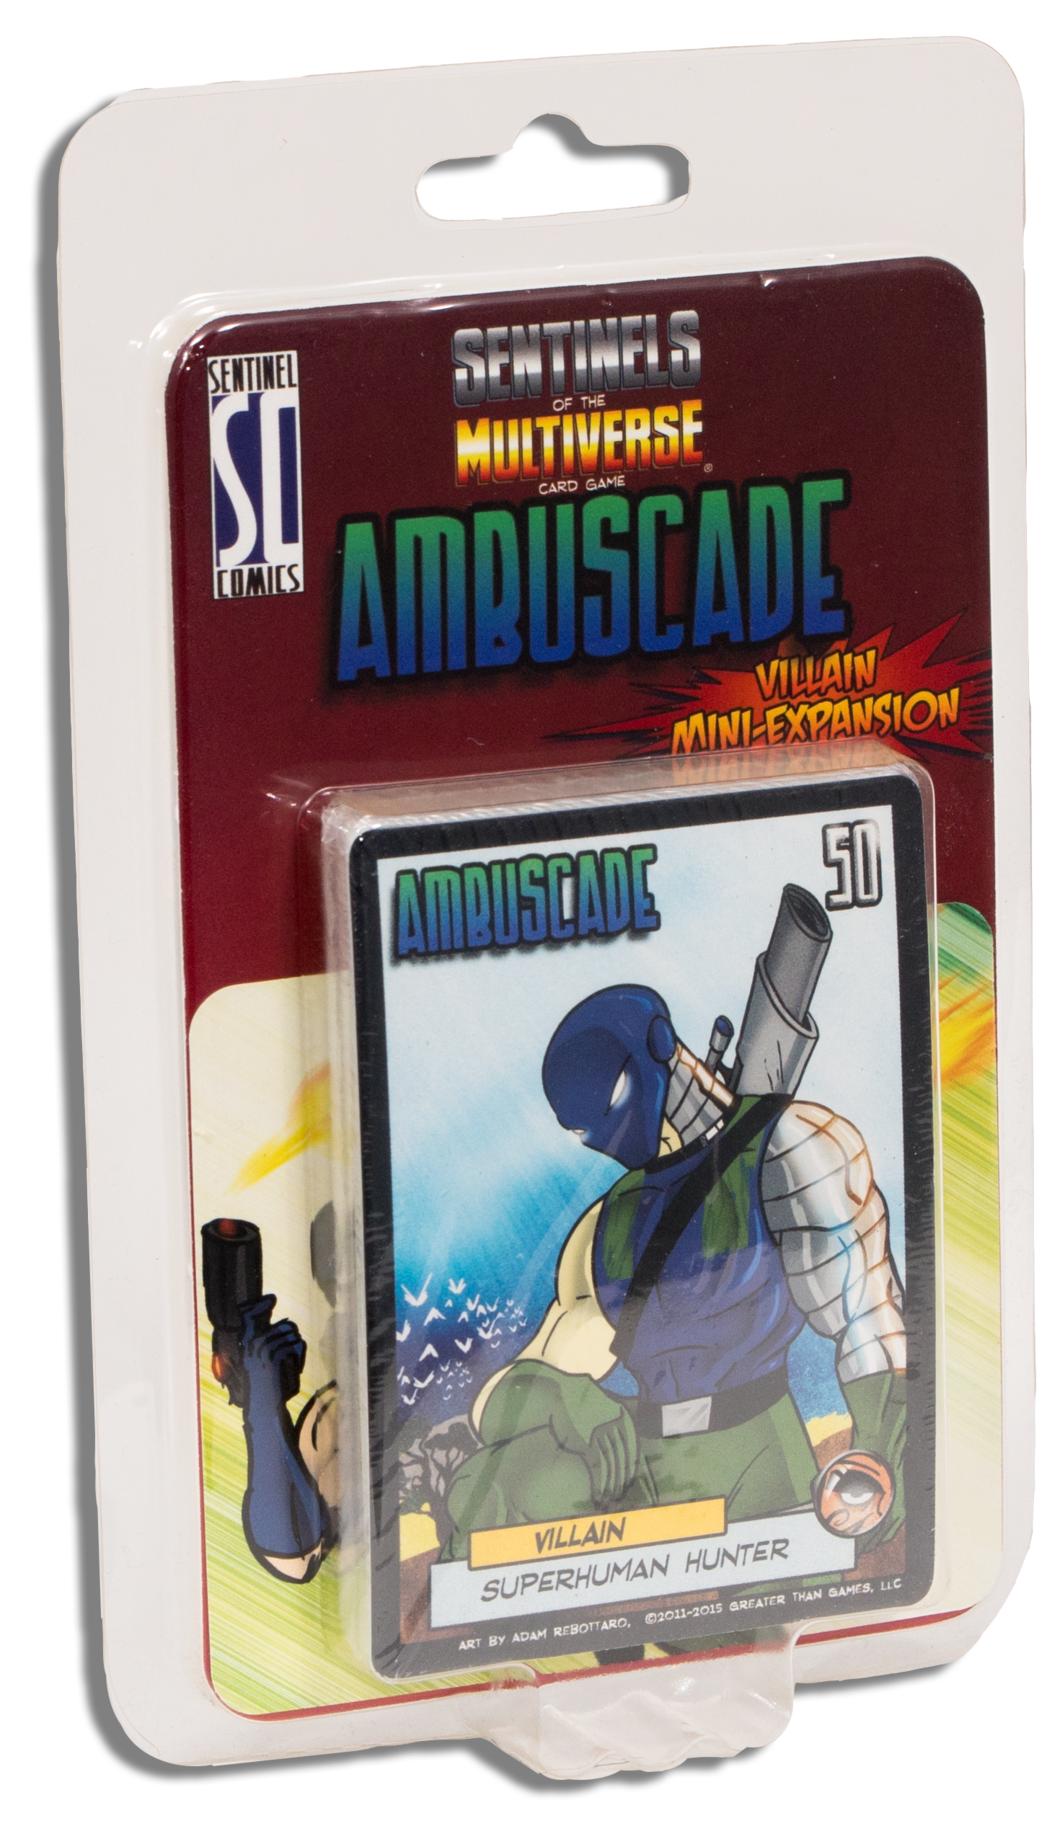 Greater Than Games Sentinels of the Multiverse: Ambuscade Villain Mini-Expansion